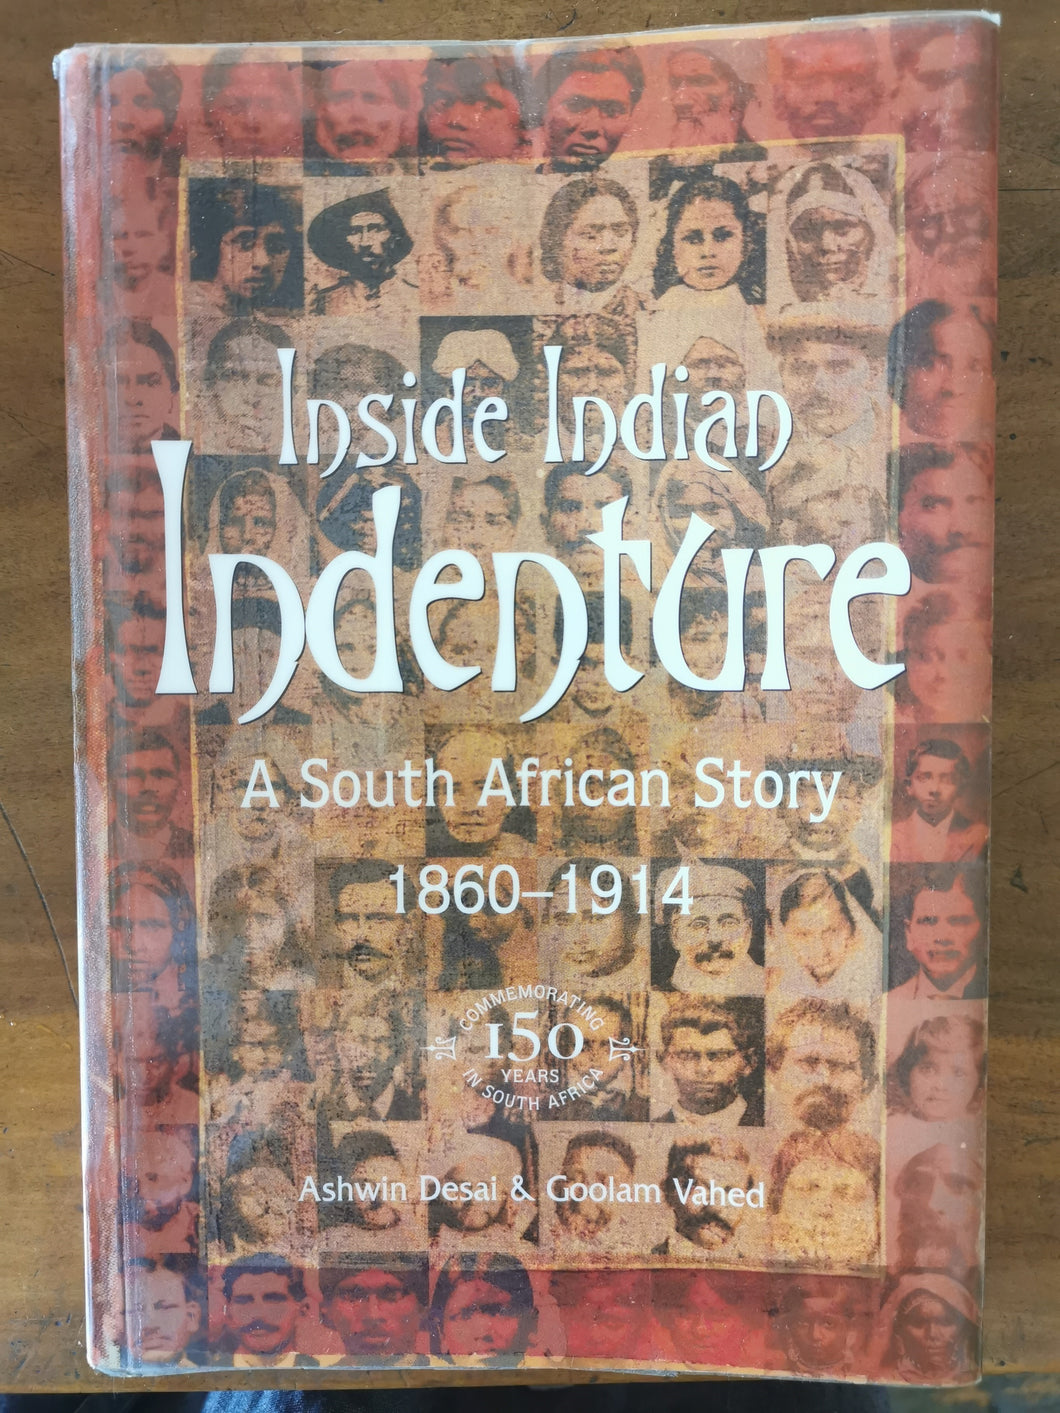 Inside Indian Indenture: A South African Story 1860-1914 by Ashwin Desai and Goolam Vahed